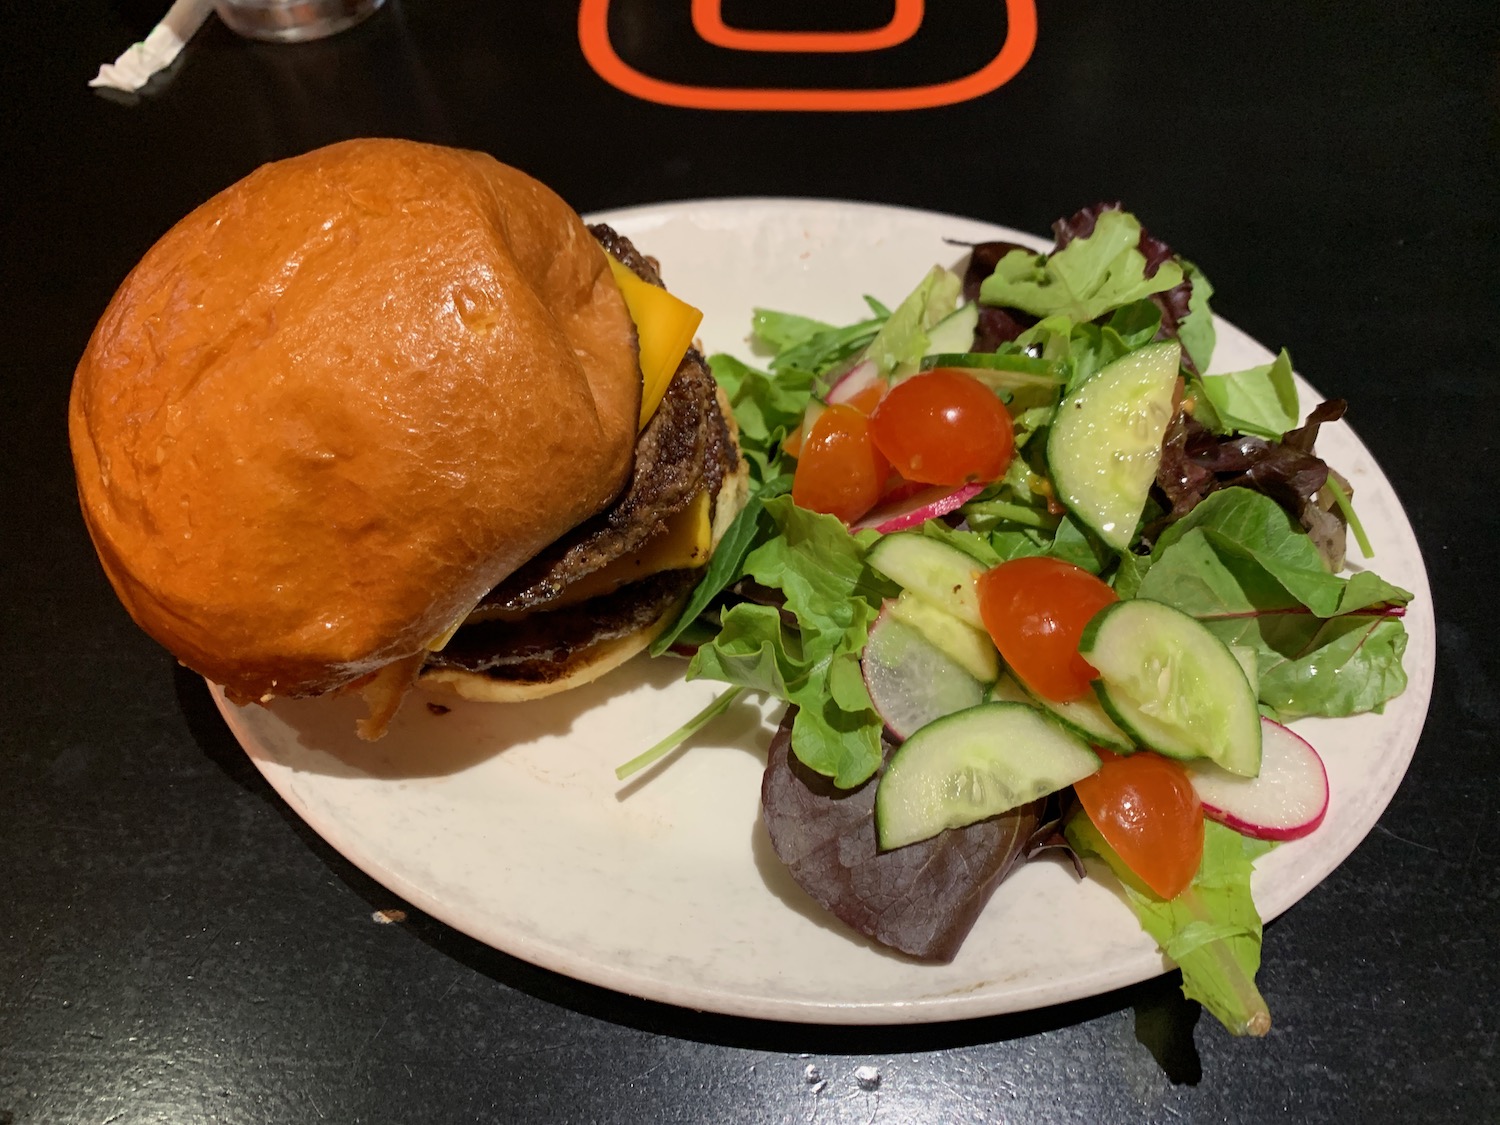 a burger and salad on a plate